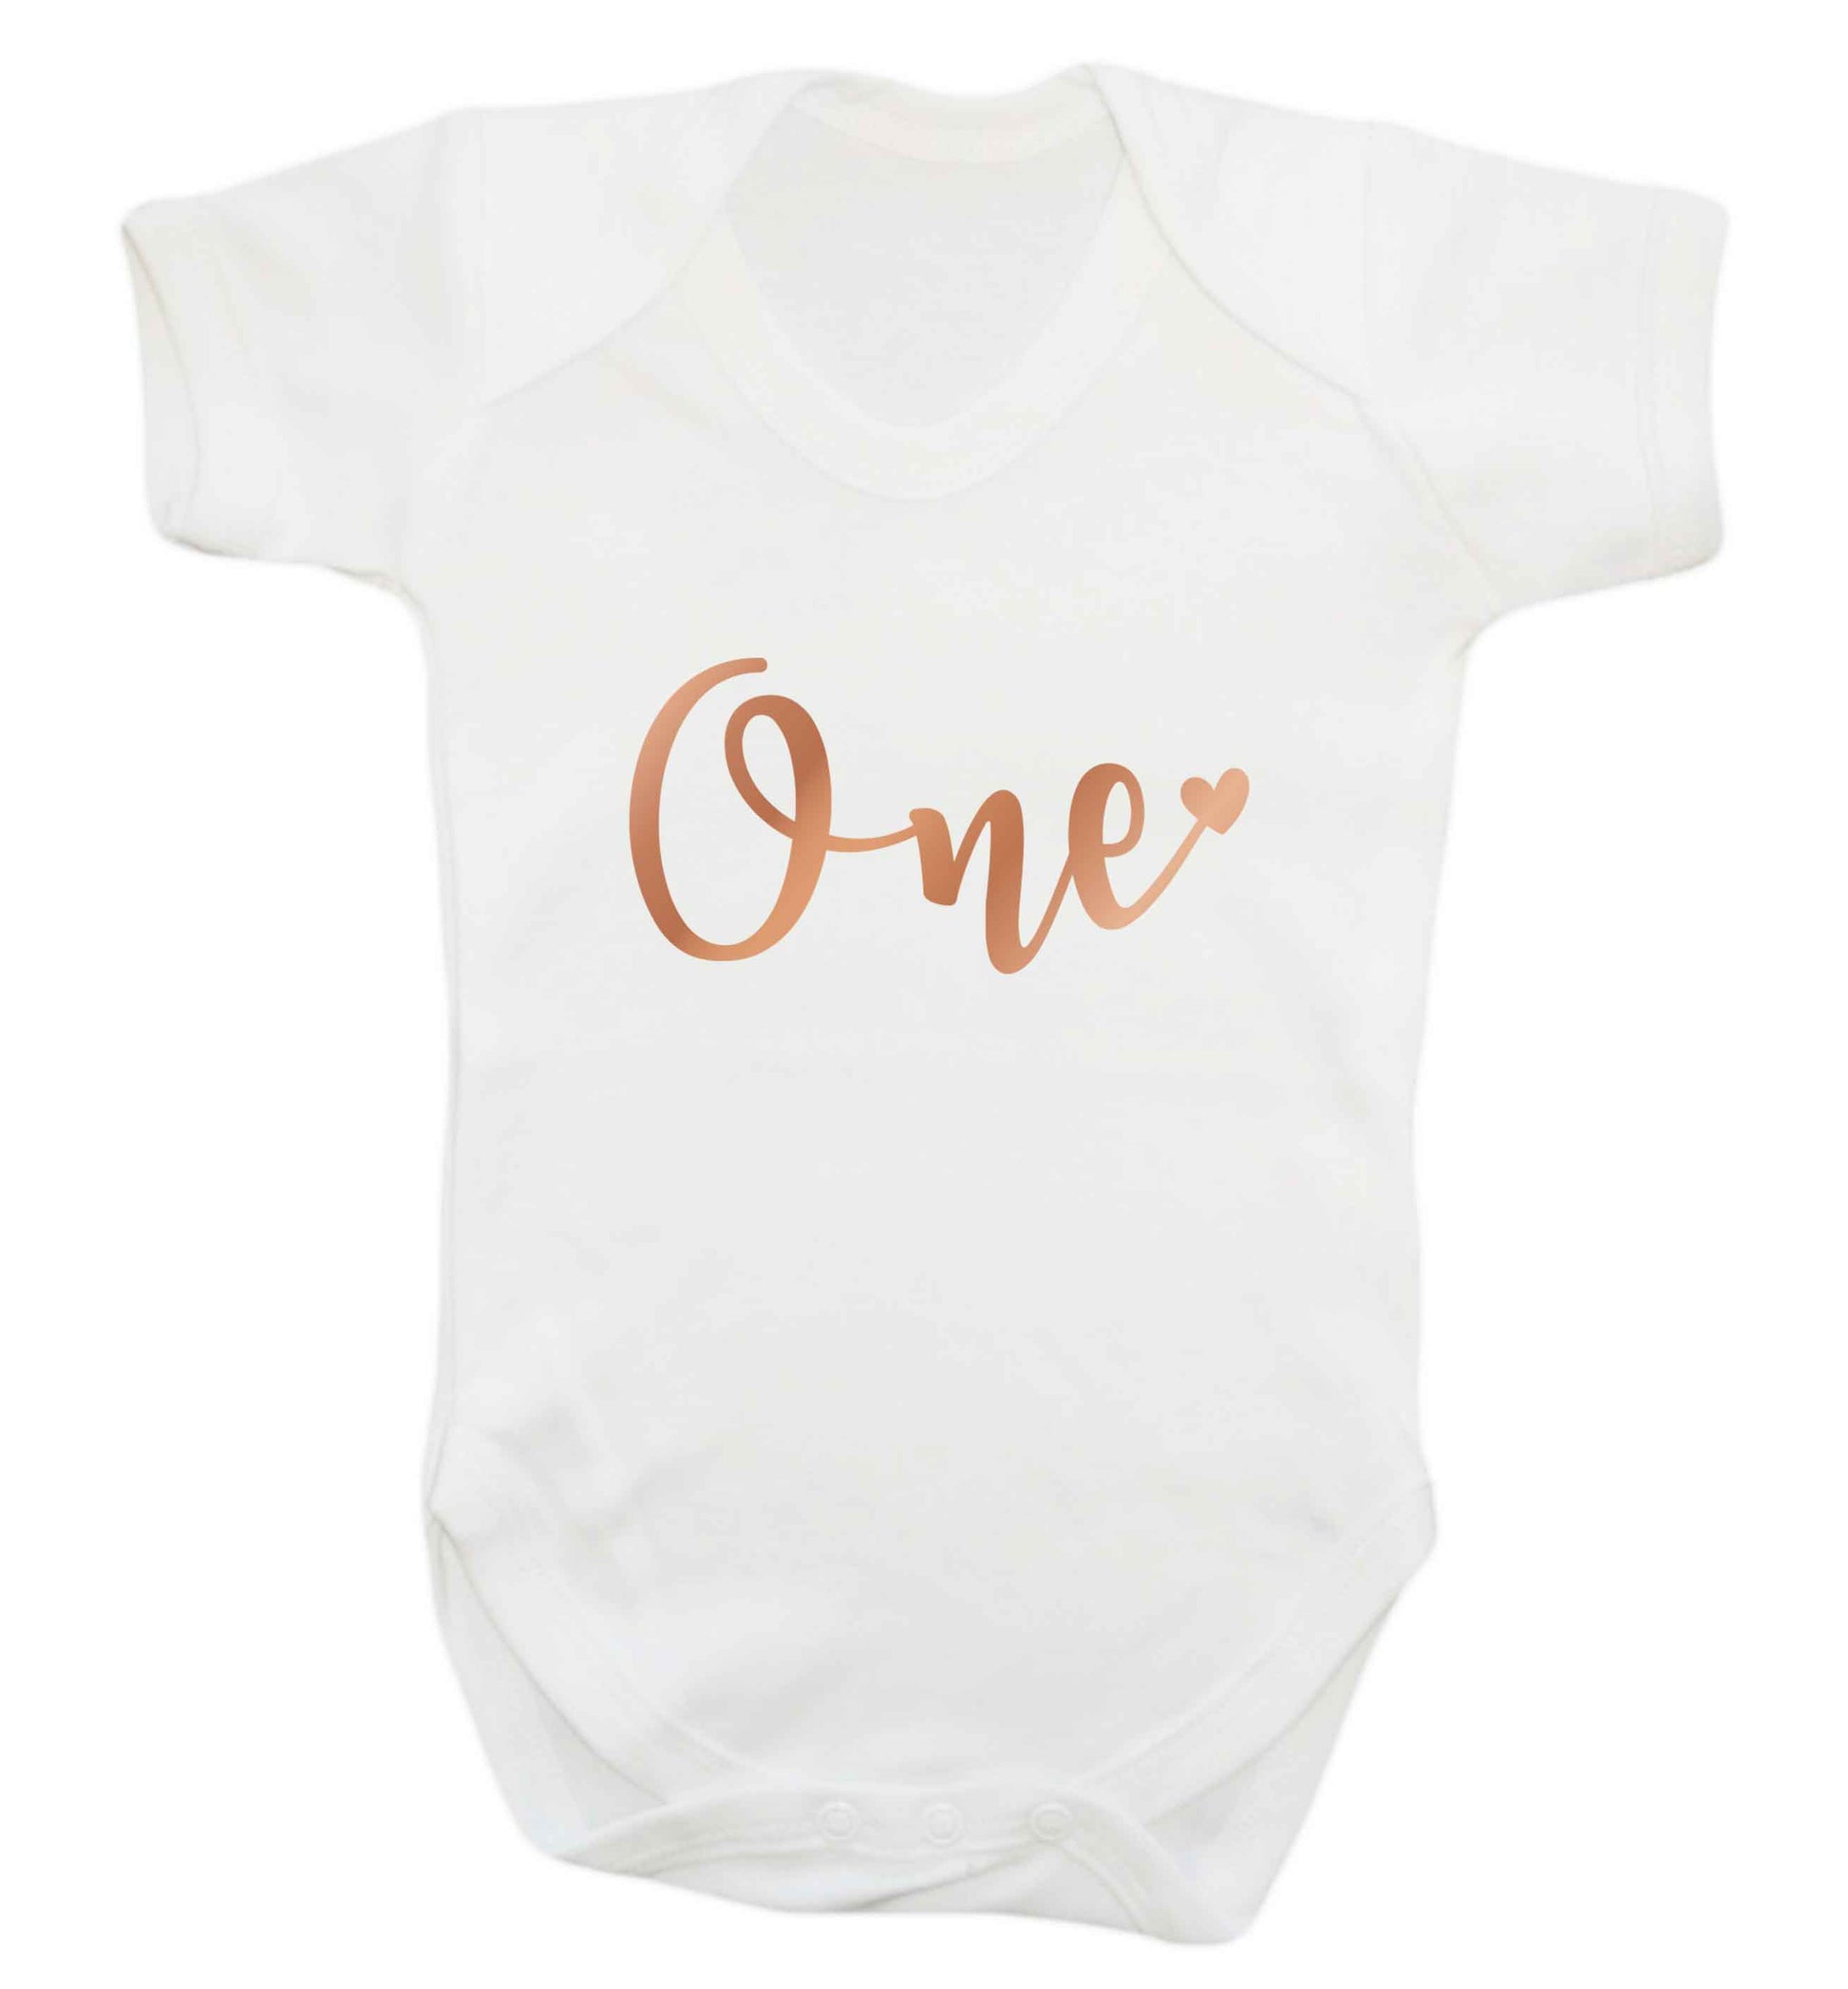 Rose Gold One baby vest white 18-24 months